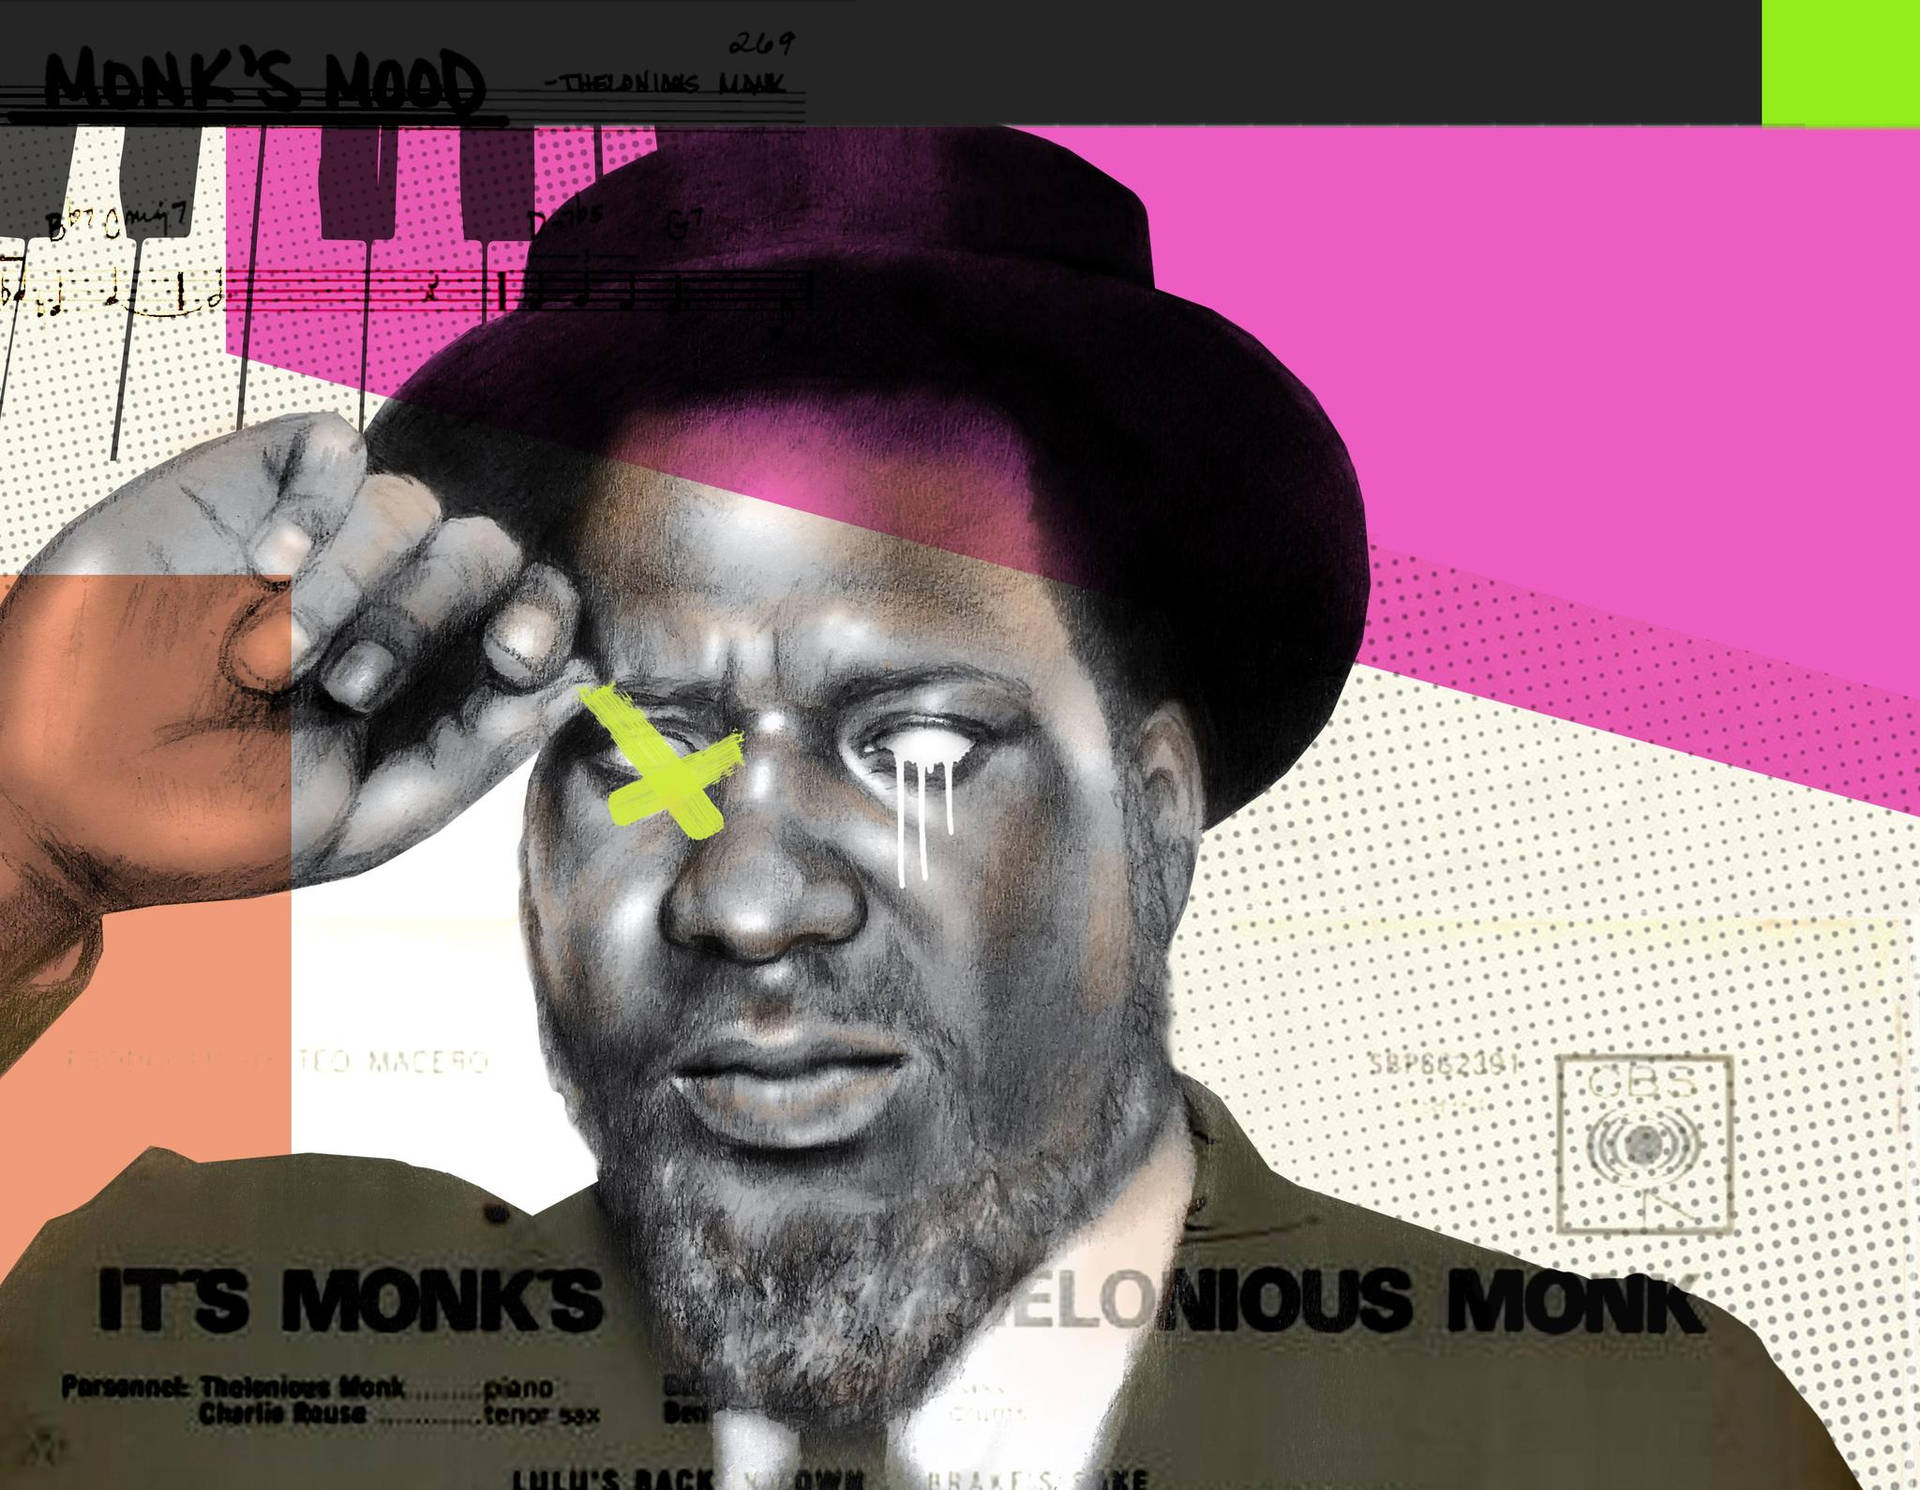 Theloniousmonk, Det Är Monk's Day Album. (note: It Is Not Clear What Is Meant By 